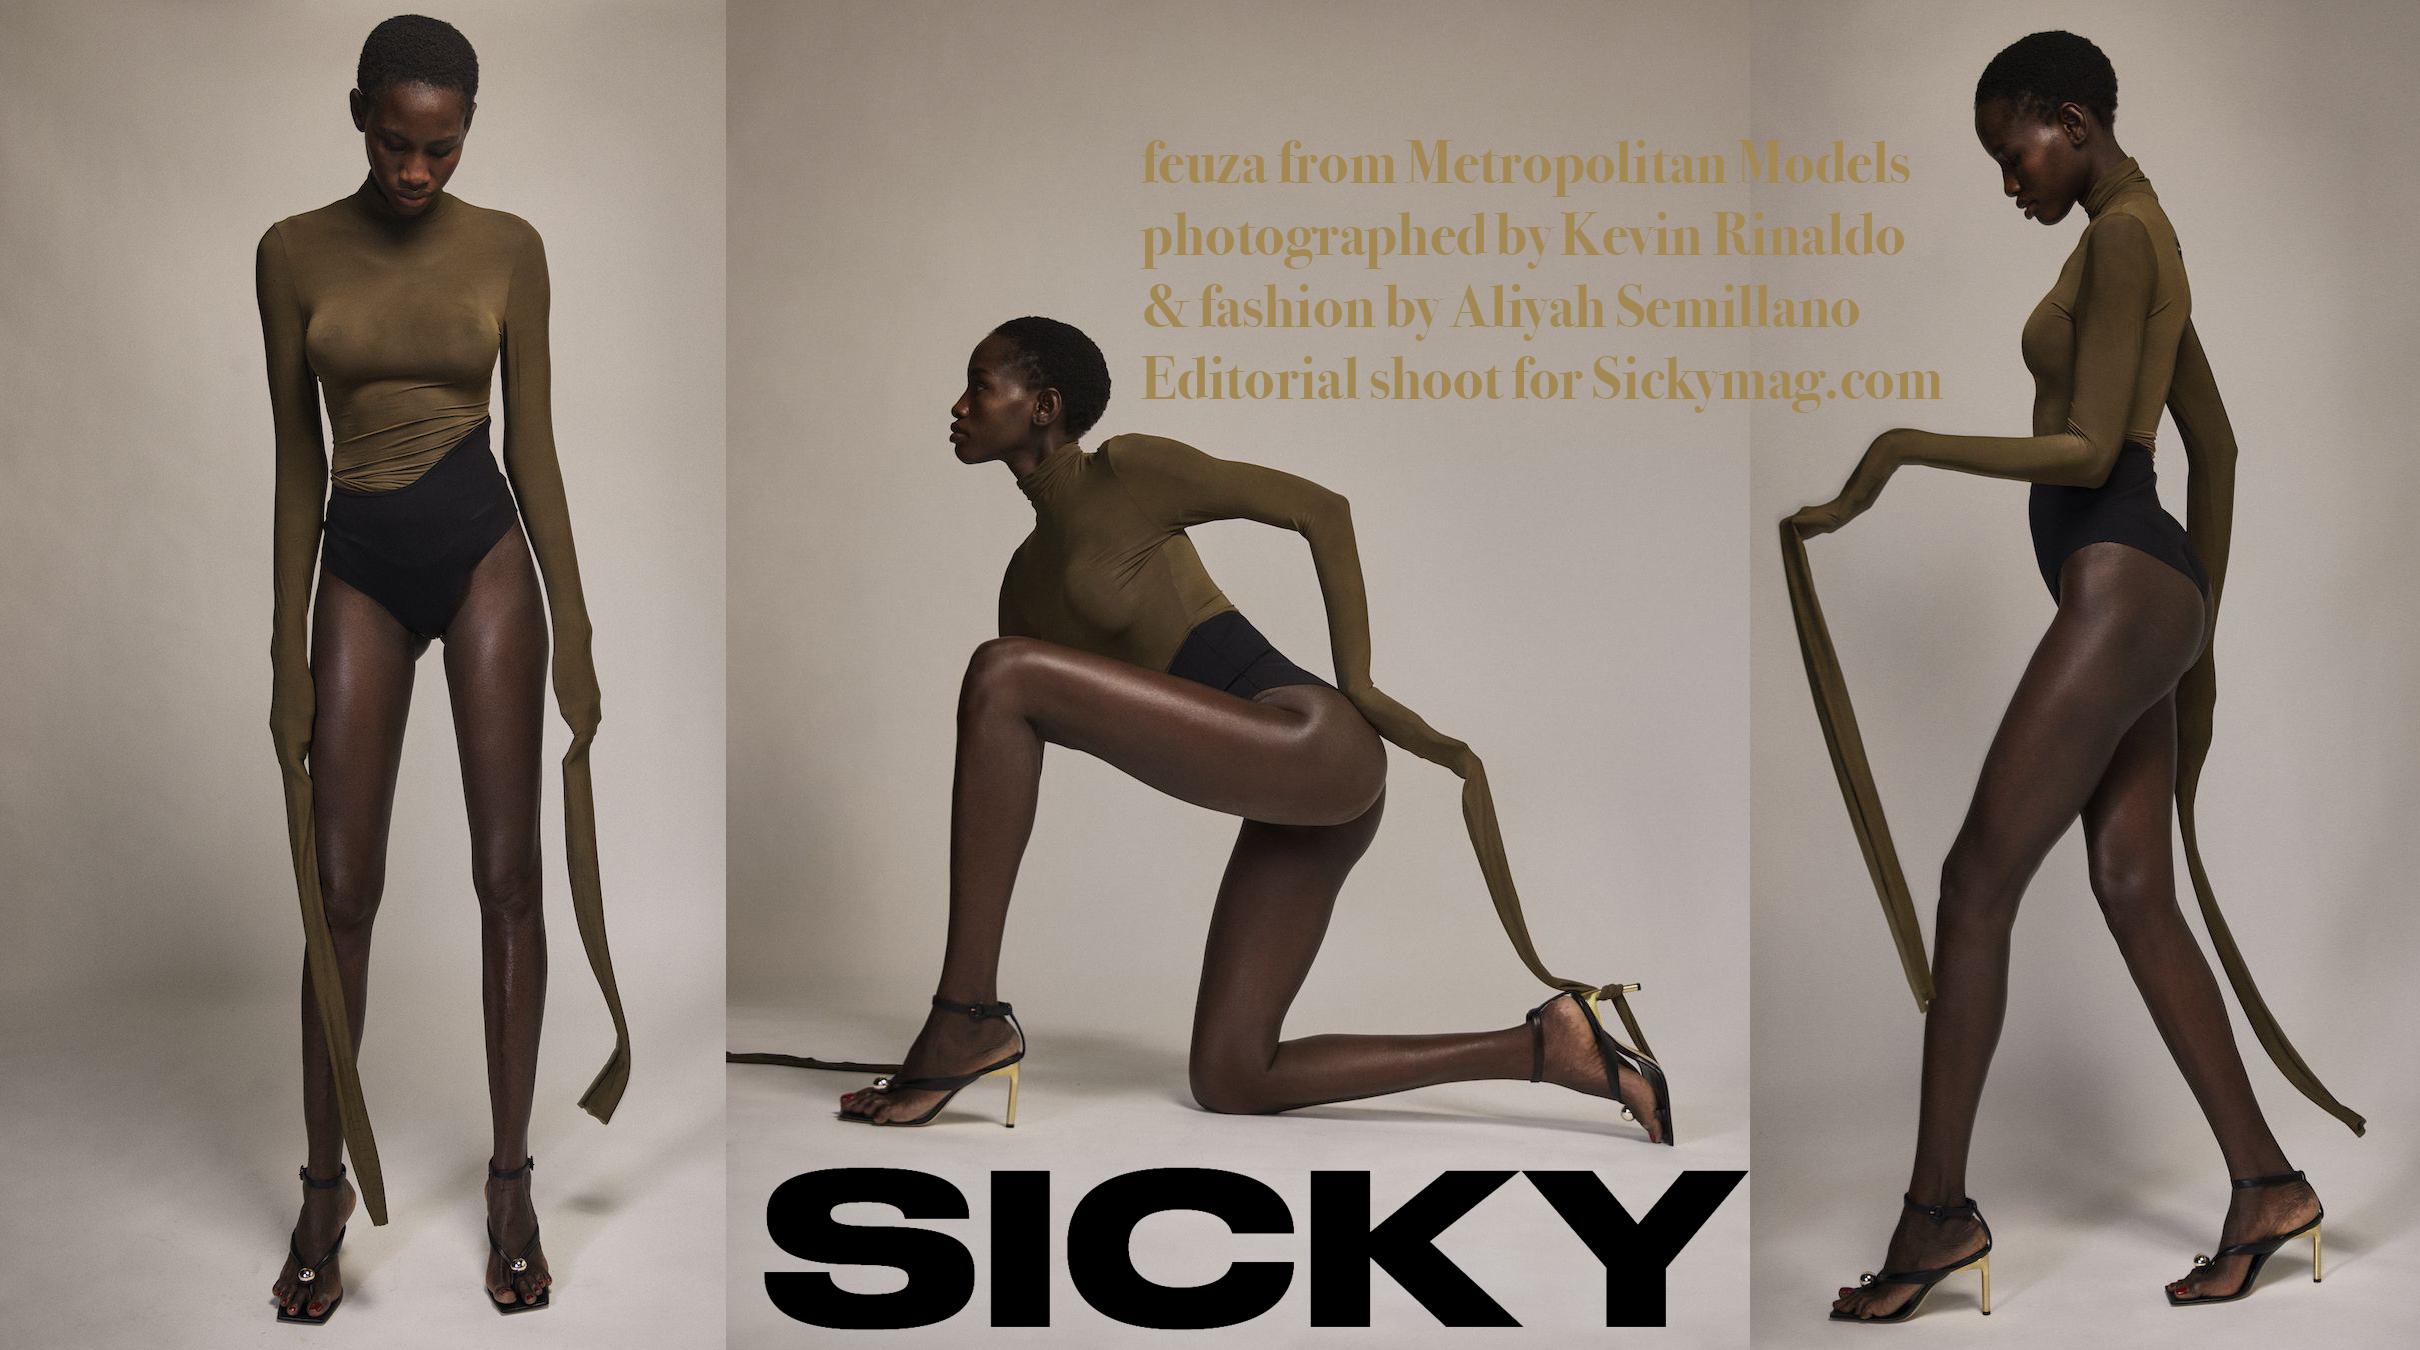 AFRICA-FASHION-STYLE-feuza-from-Metropolitan-Models-photographed-by-Kevin-Rinaldo-and-fashion-by-Aliyah-Semillano-Editorial-shoot-for-Sickymag.com-DN-A-INTERNATIONAL-Media-Partner